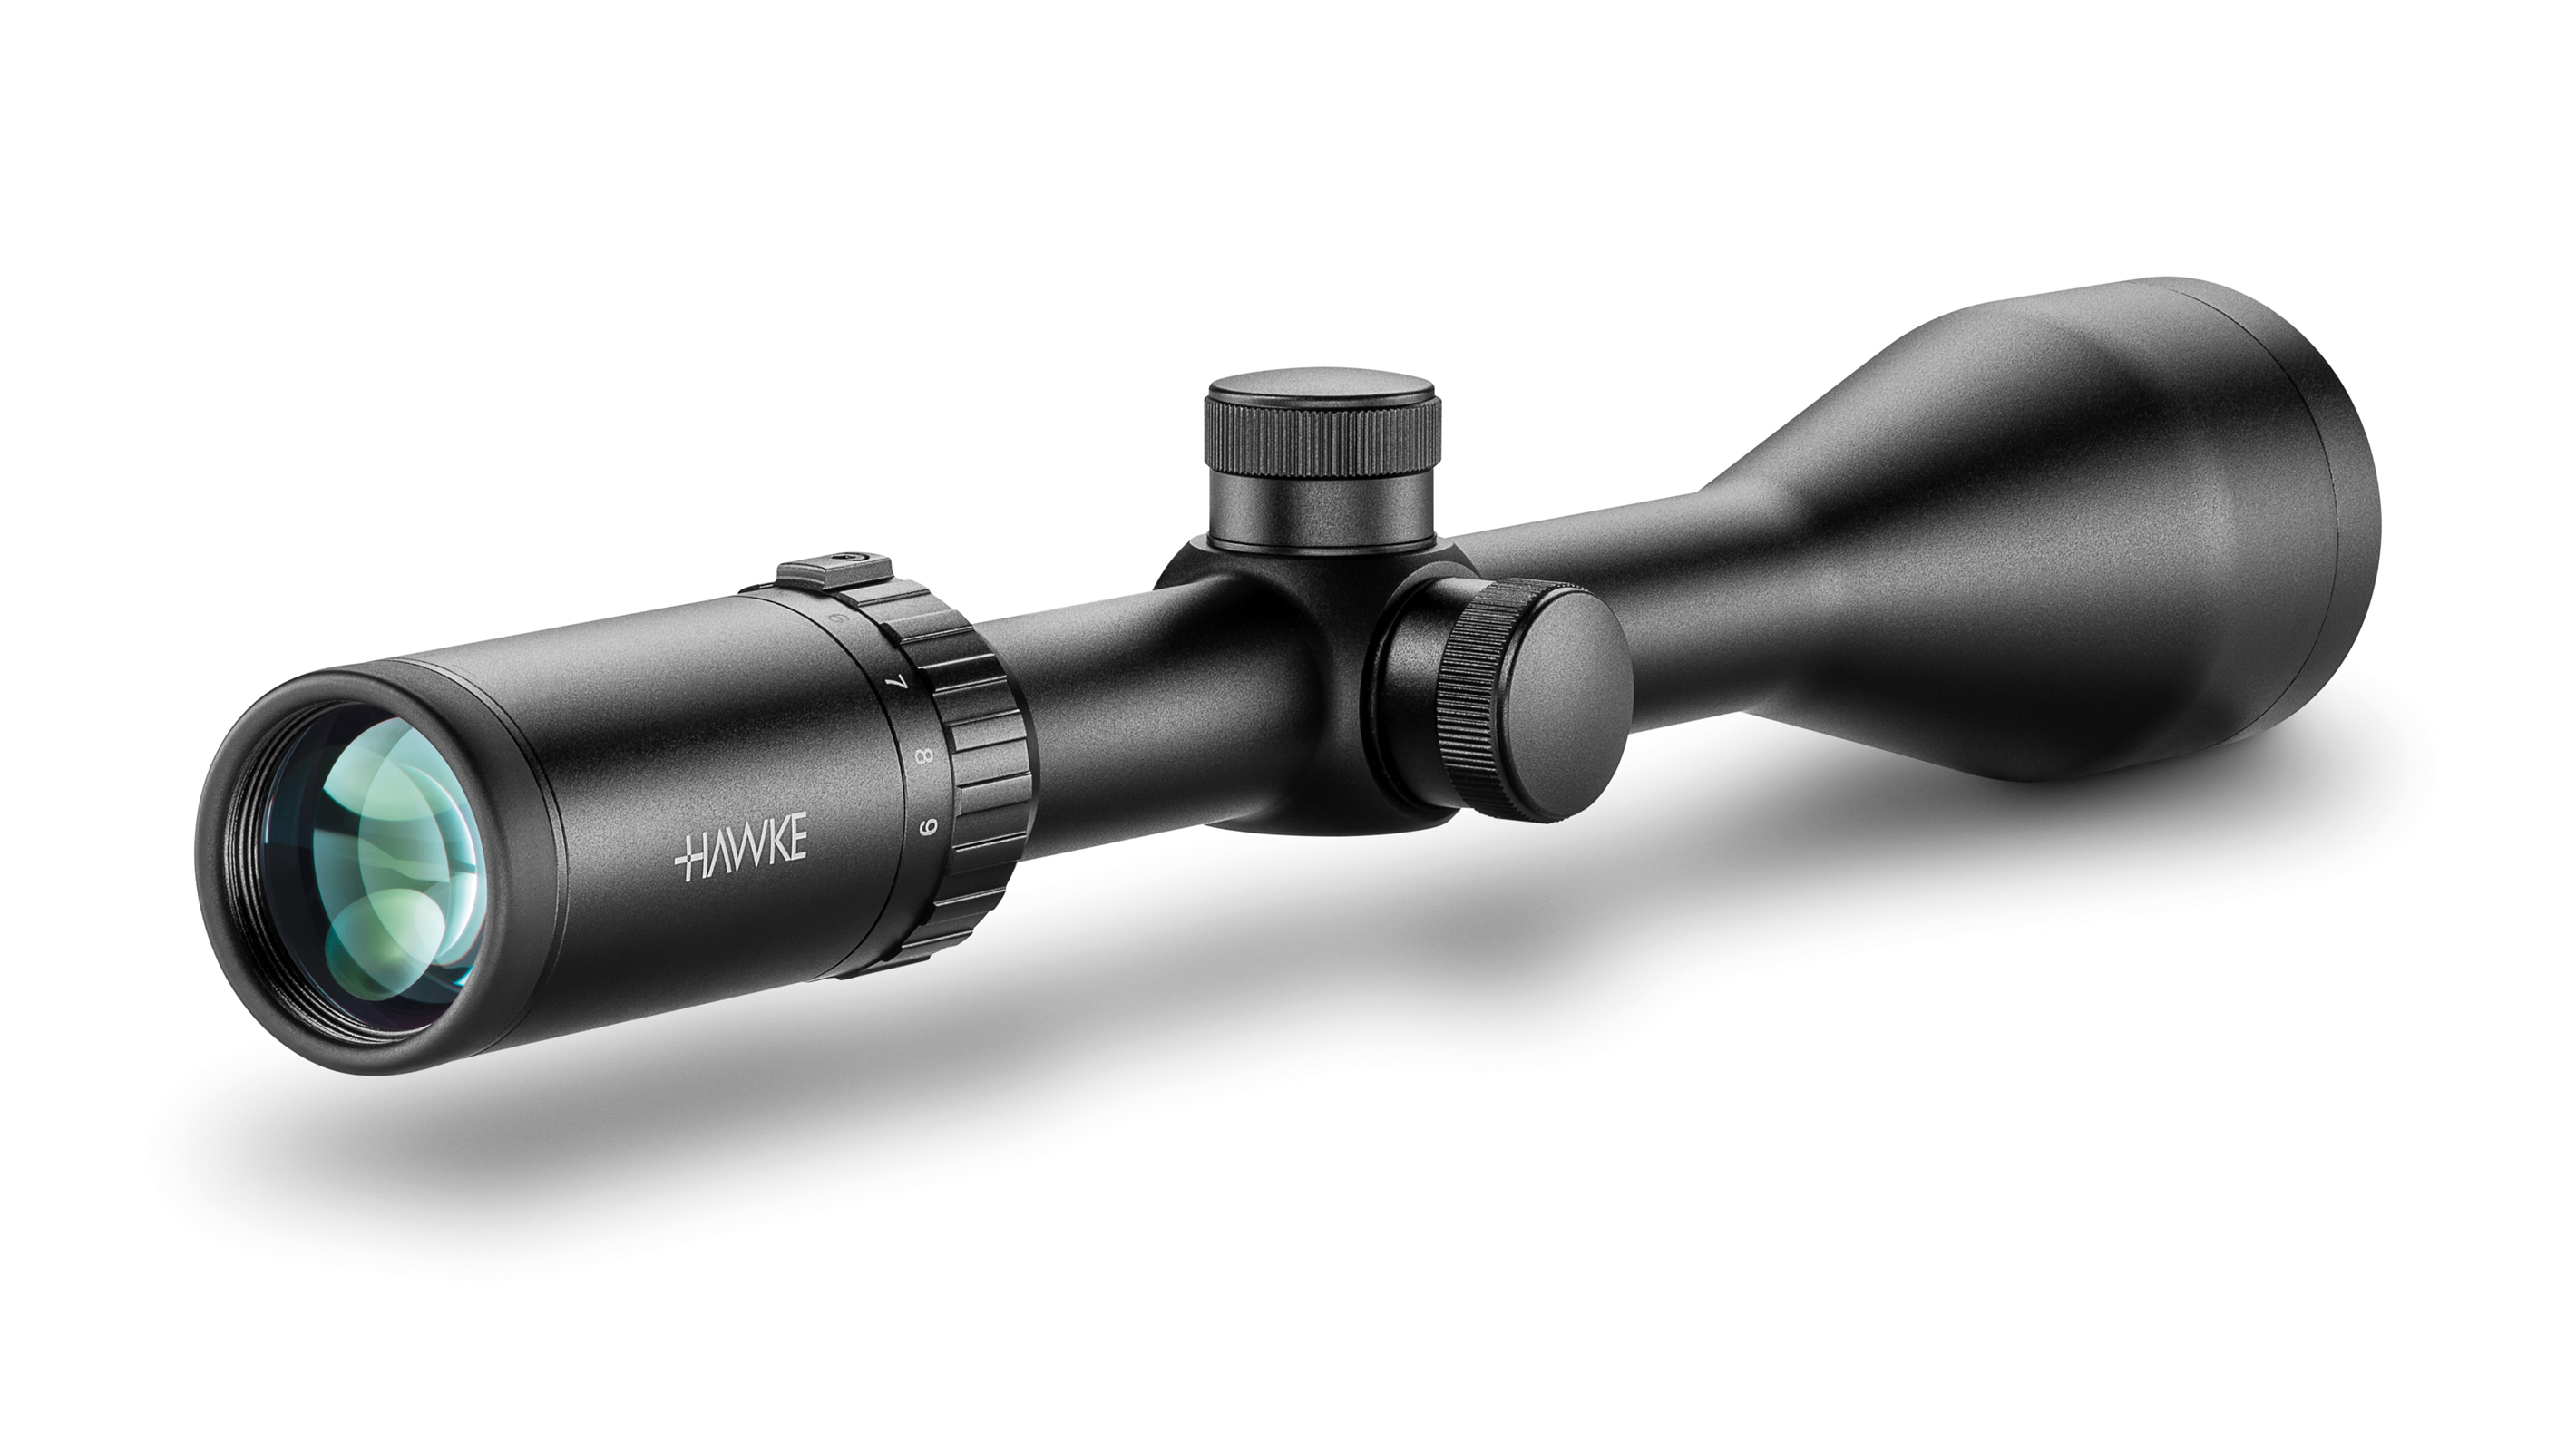 Ocular End View Of The Hawke Vantage 3-9x50 Mil Dot Rifle Scope